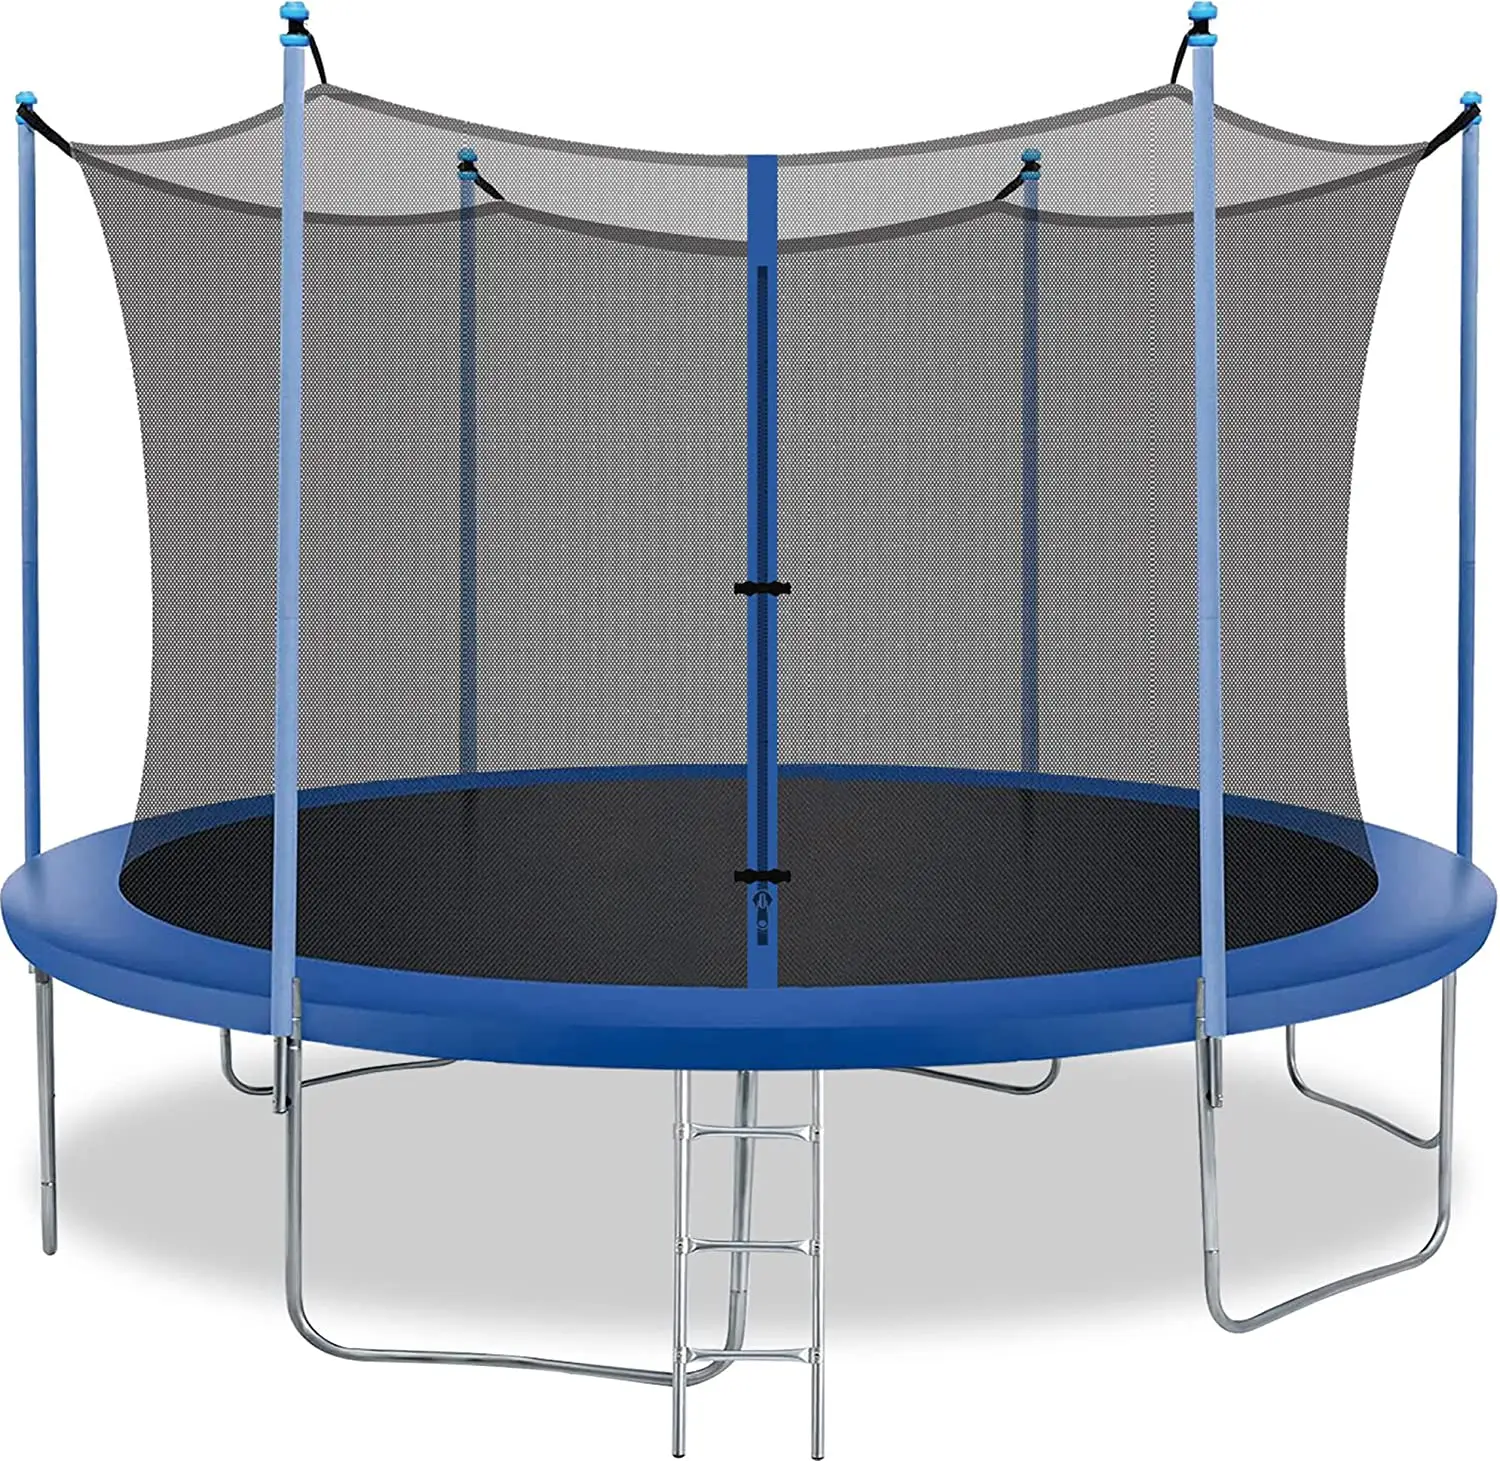 Big Outdoor Fitness Trampoline adults child Outdoor Trampoline Kids with LED Light Large Trampoline